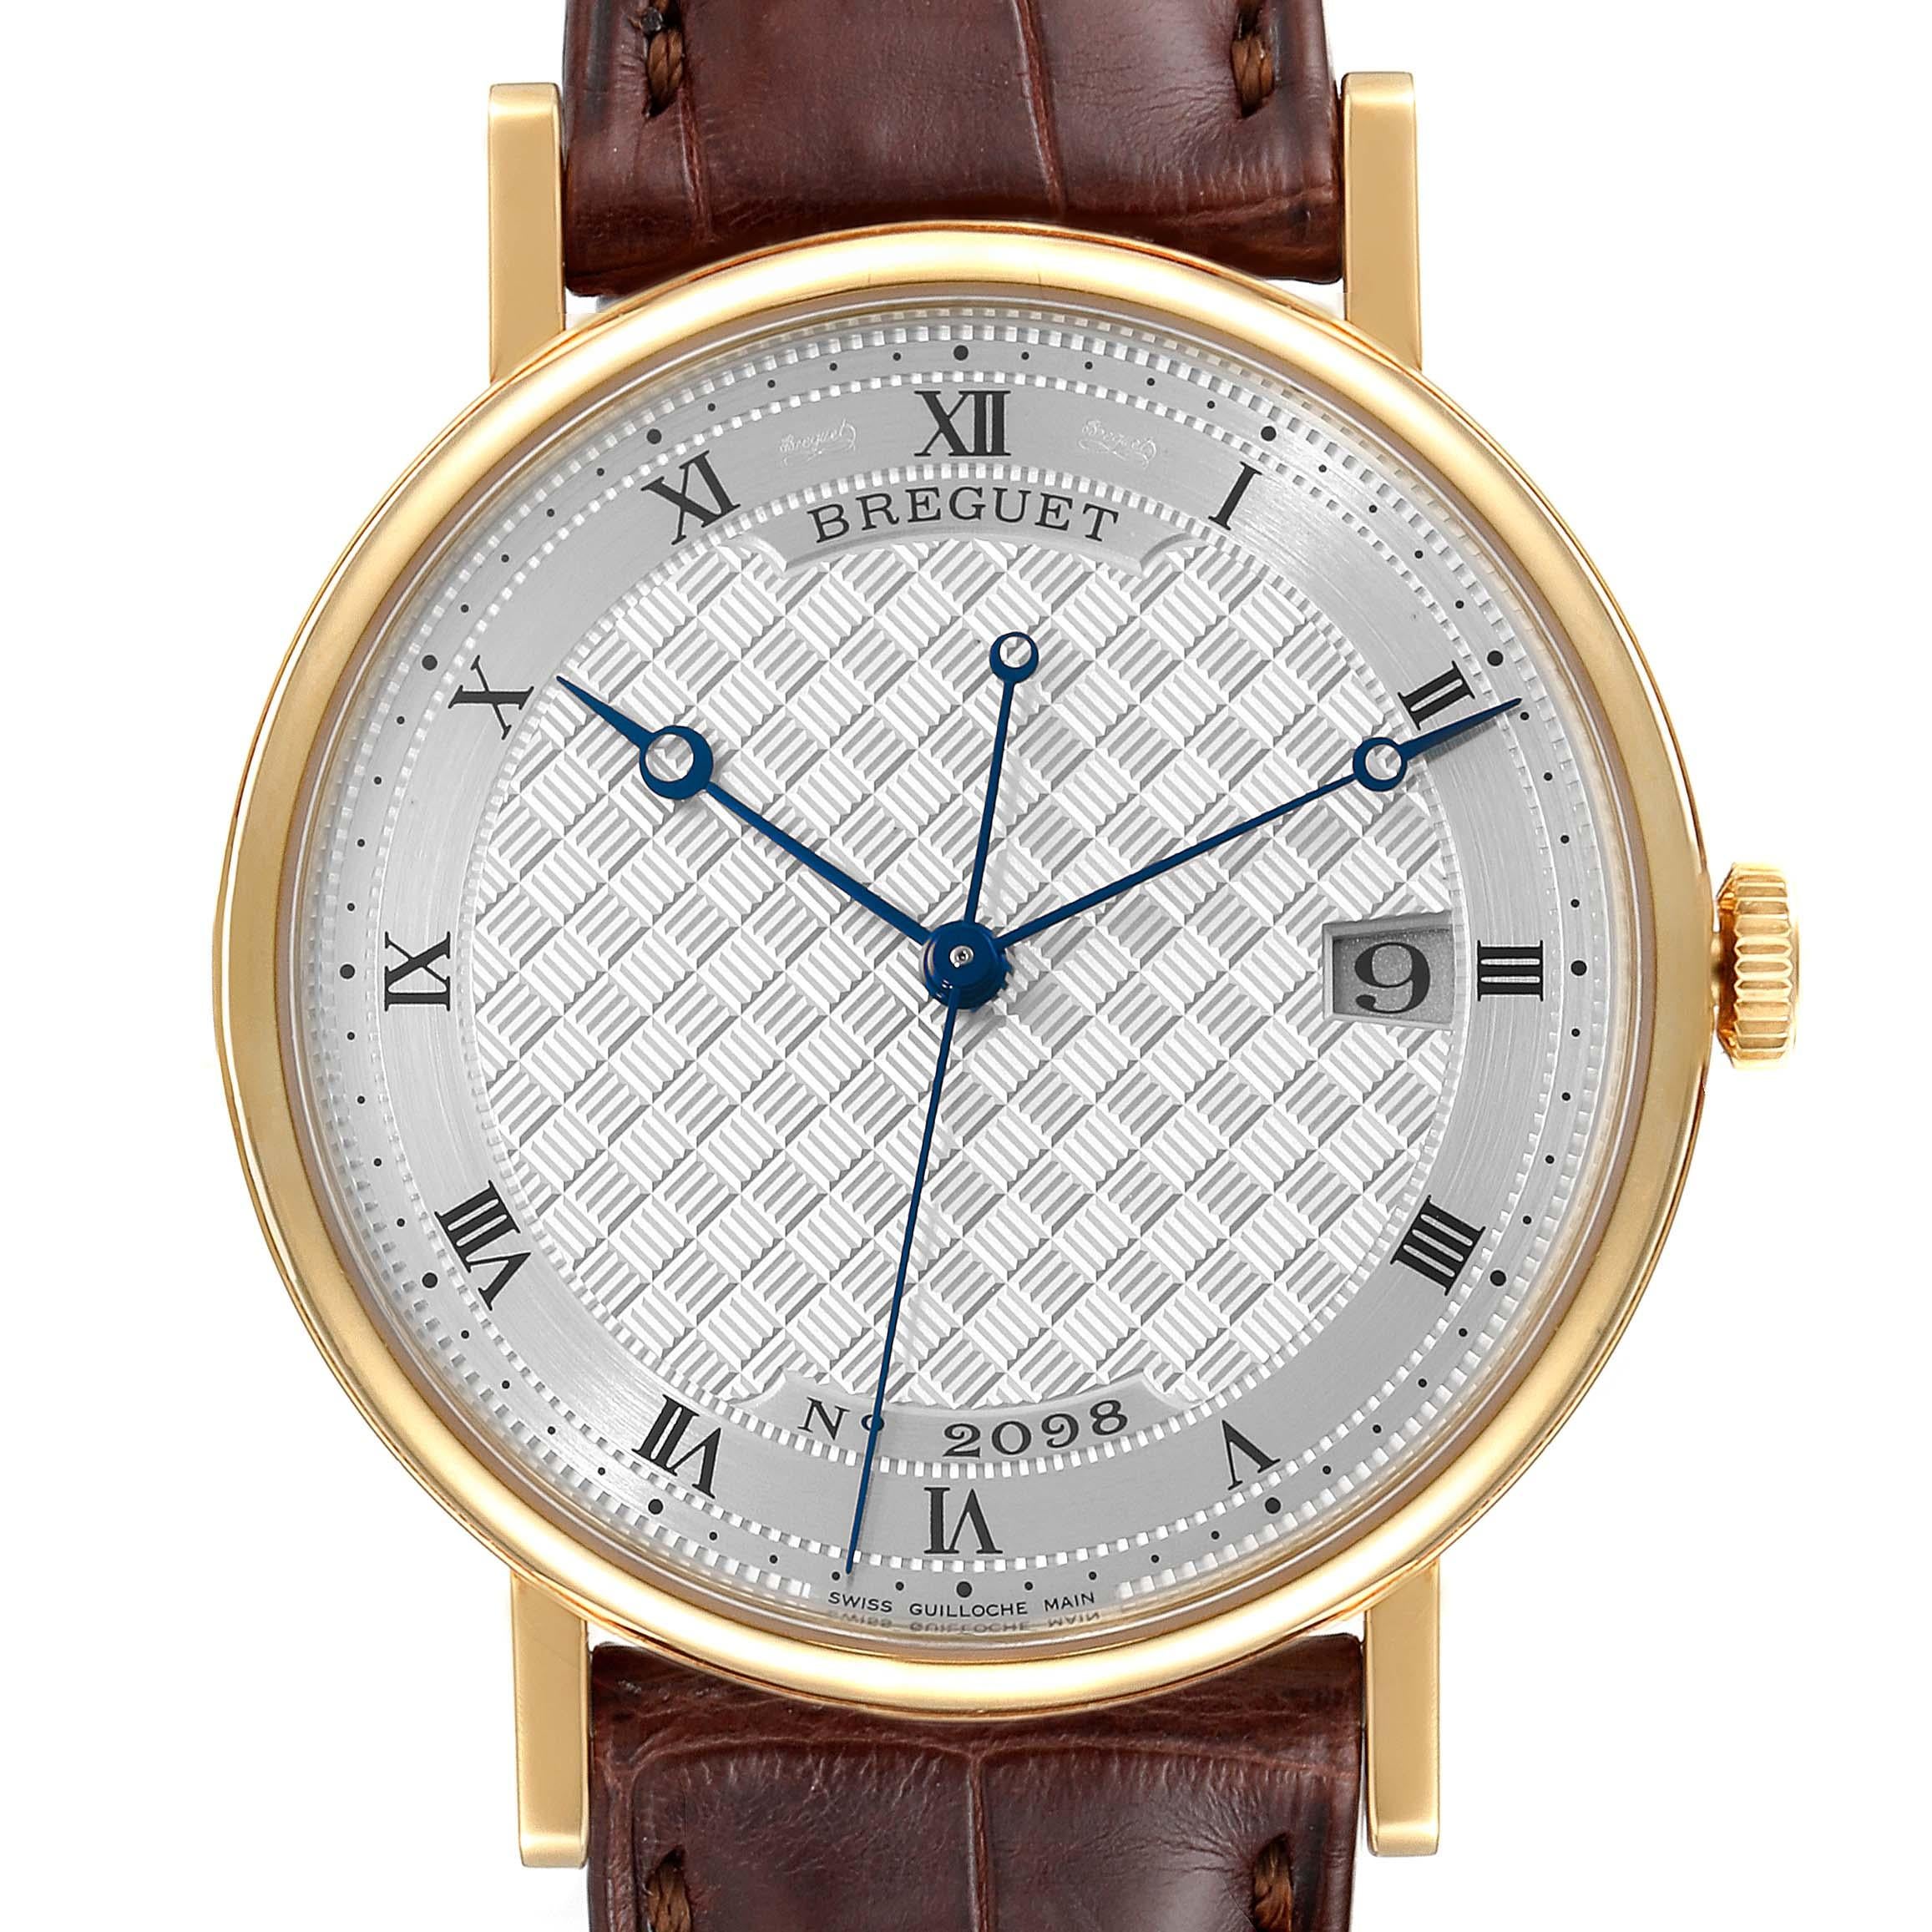 Breguet Classique 18K Yellow Gold Silver Dial Mens Watch 5177 Tag. Automatic self-winding movement. 18K yellow gold coined edged case 38.0 mm in diameter. Transparent case back. 18k yellow gold bezel. Scratch resistant sapphire crystal. Silver